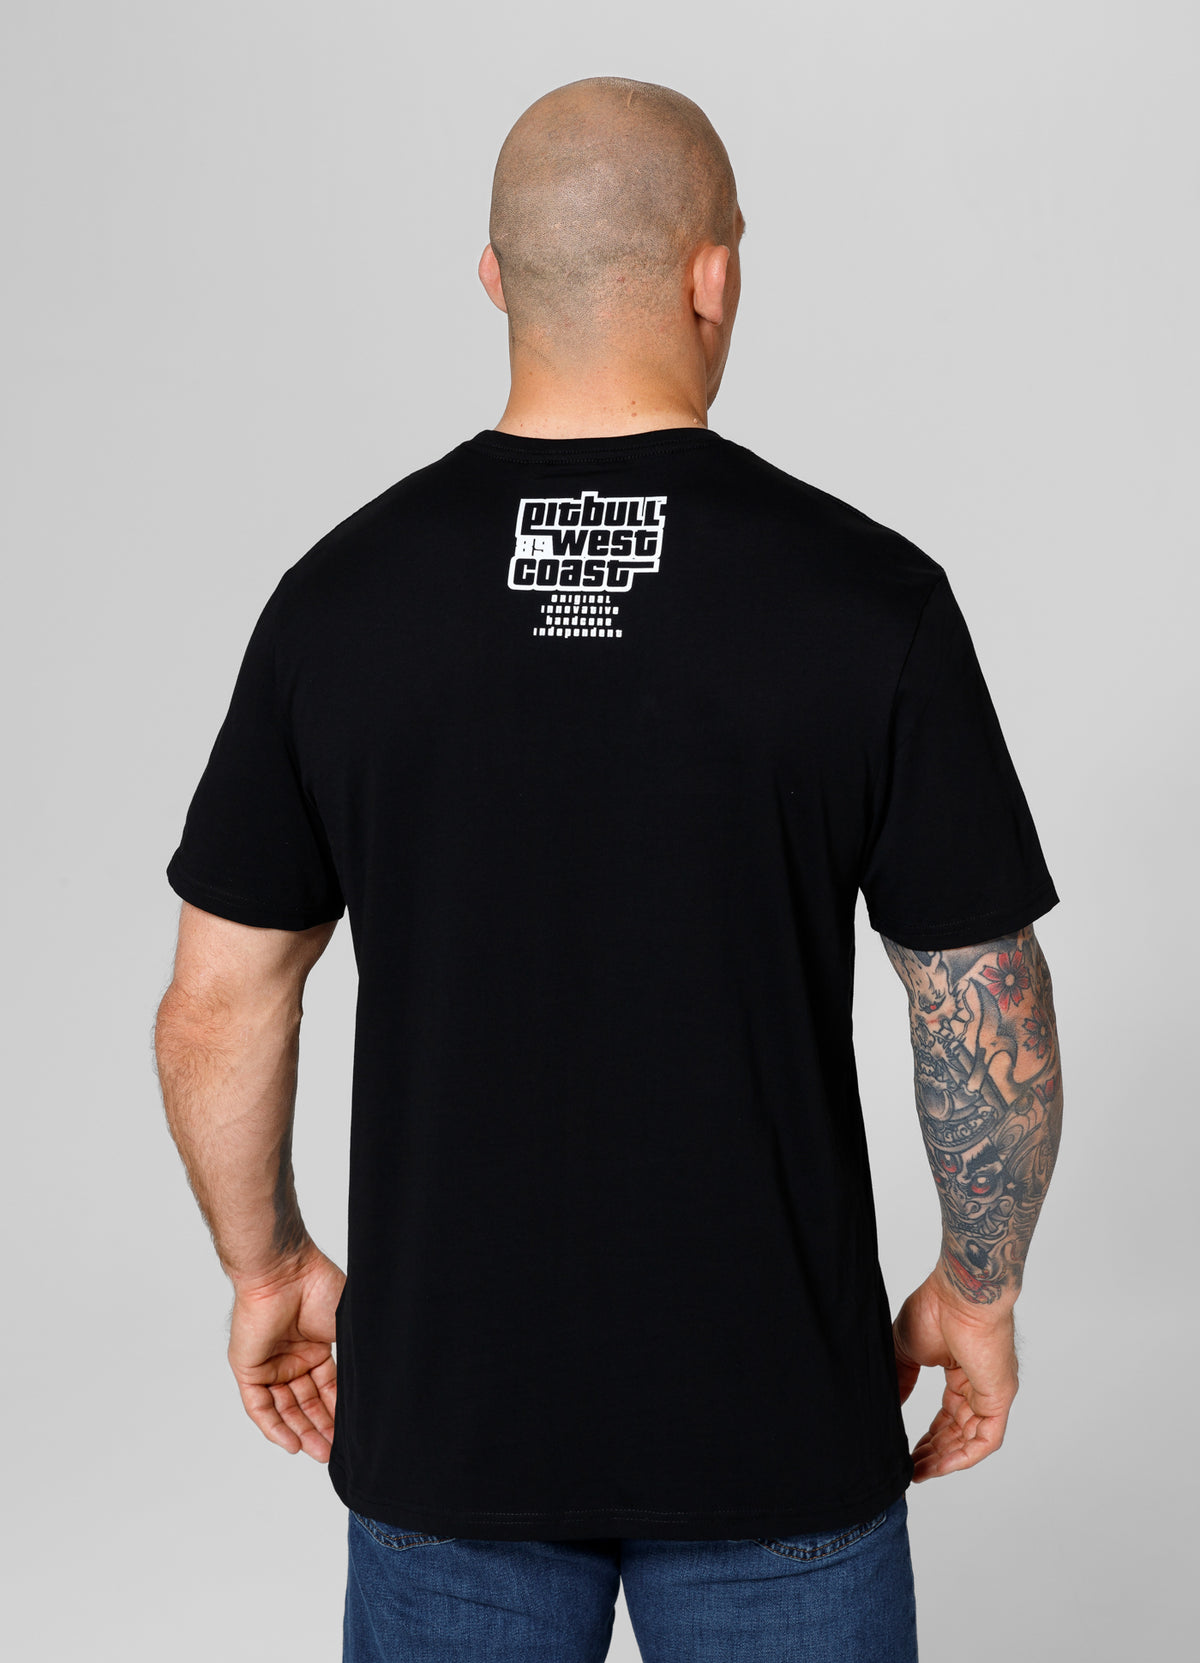 MOST WANTED Black T-shirt